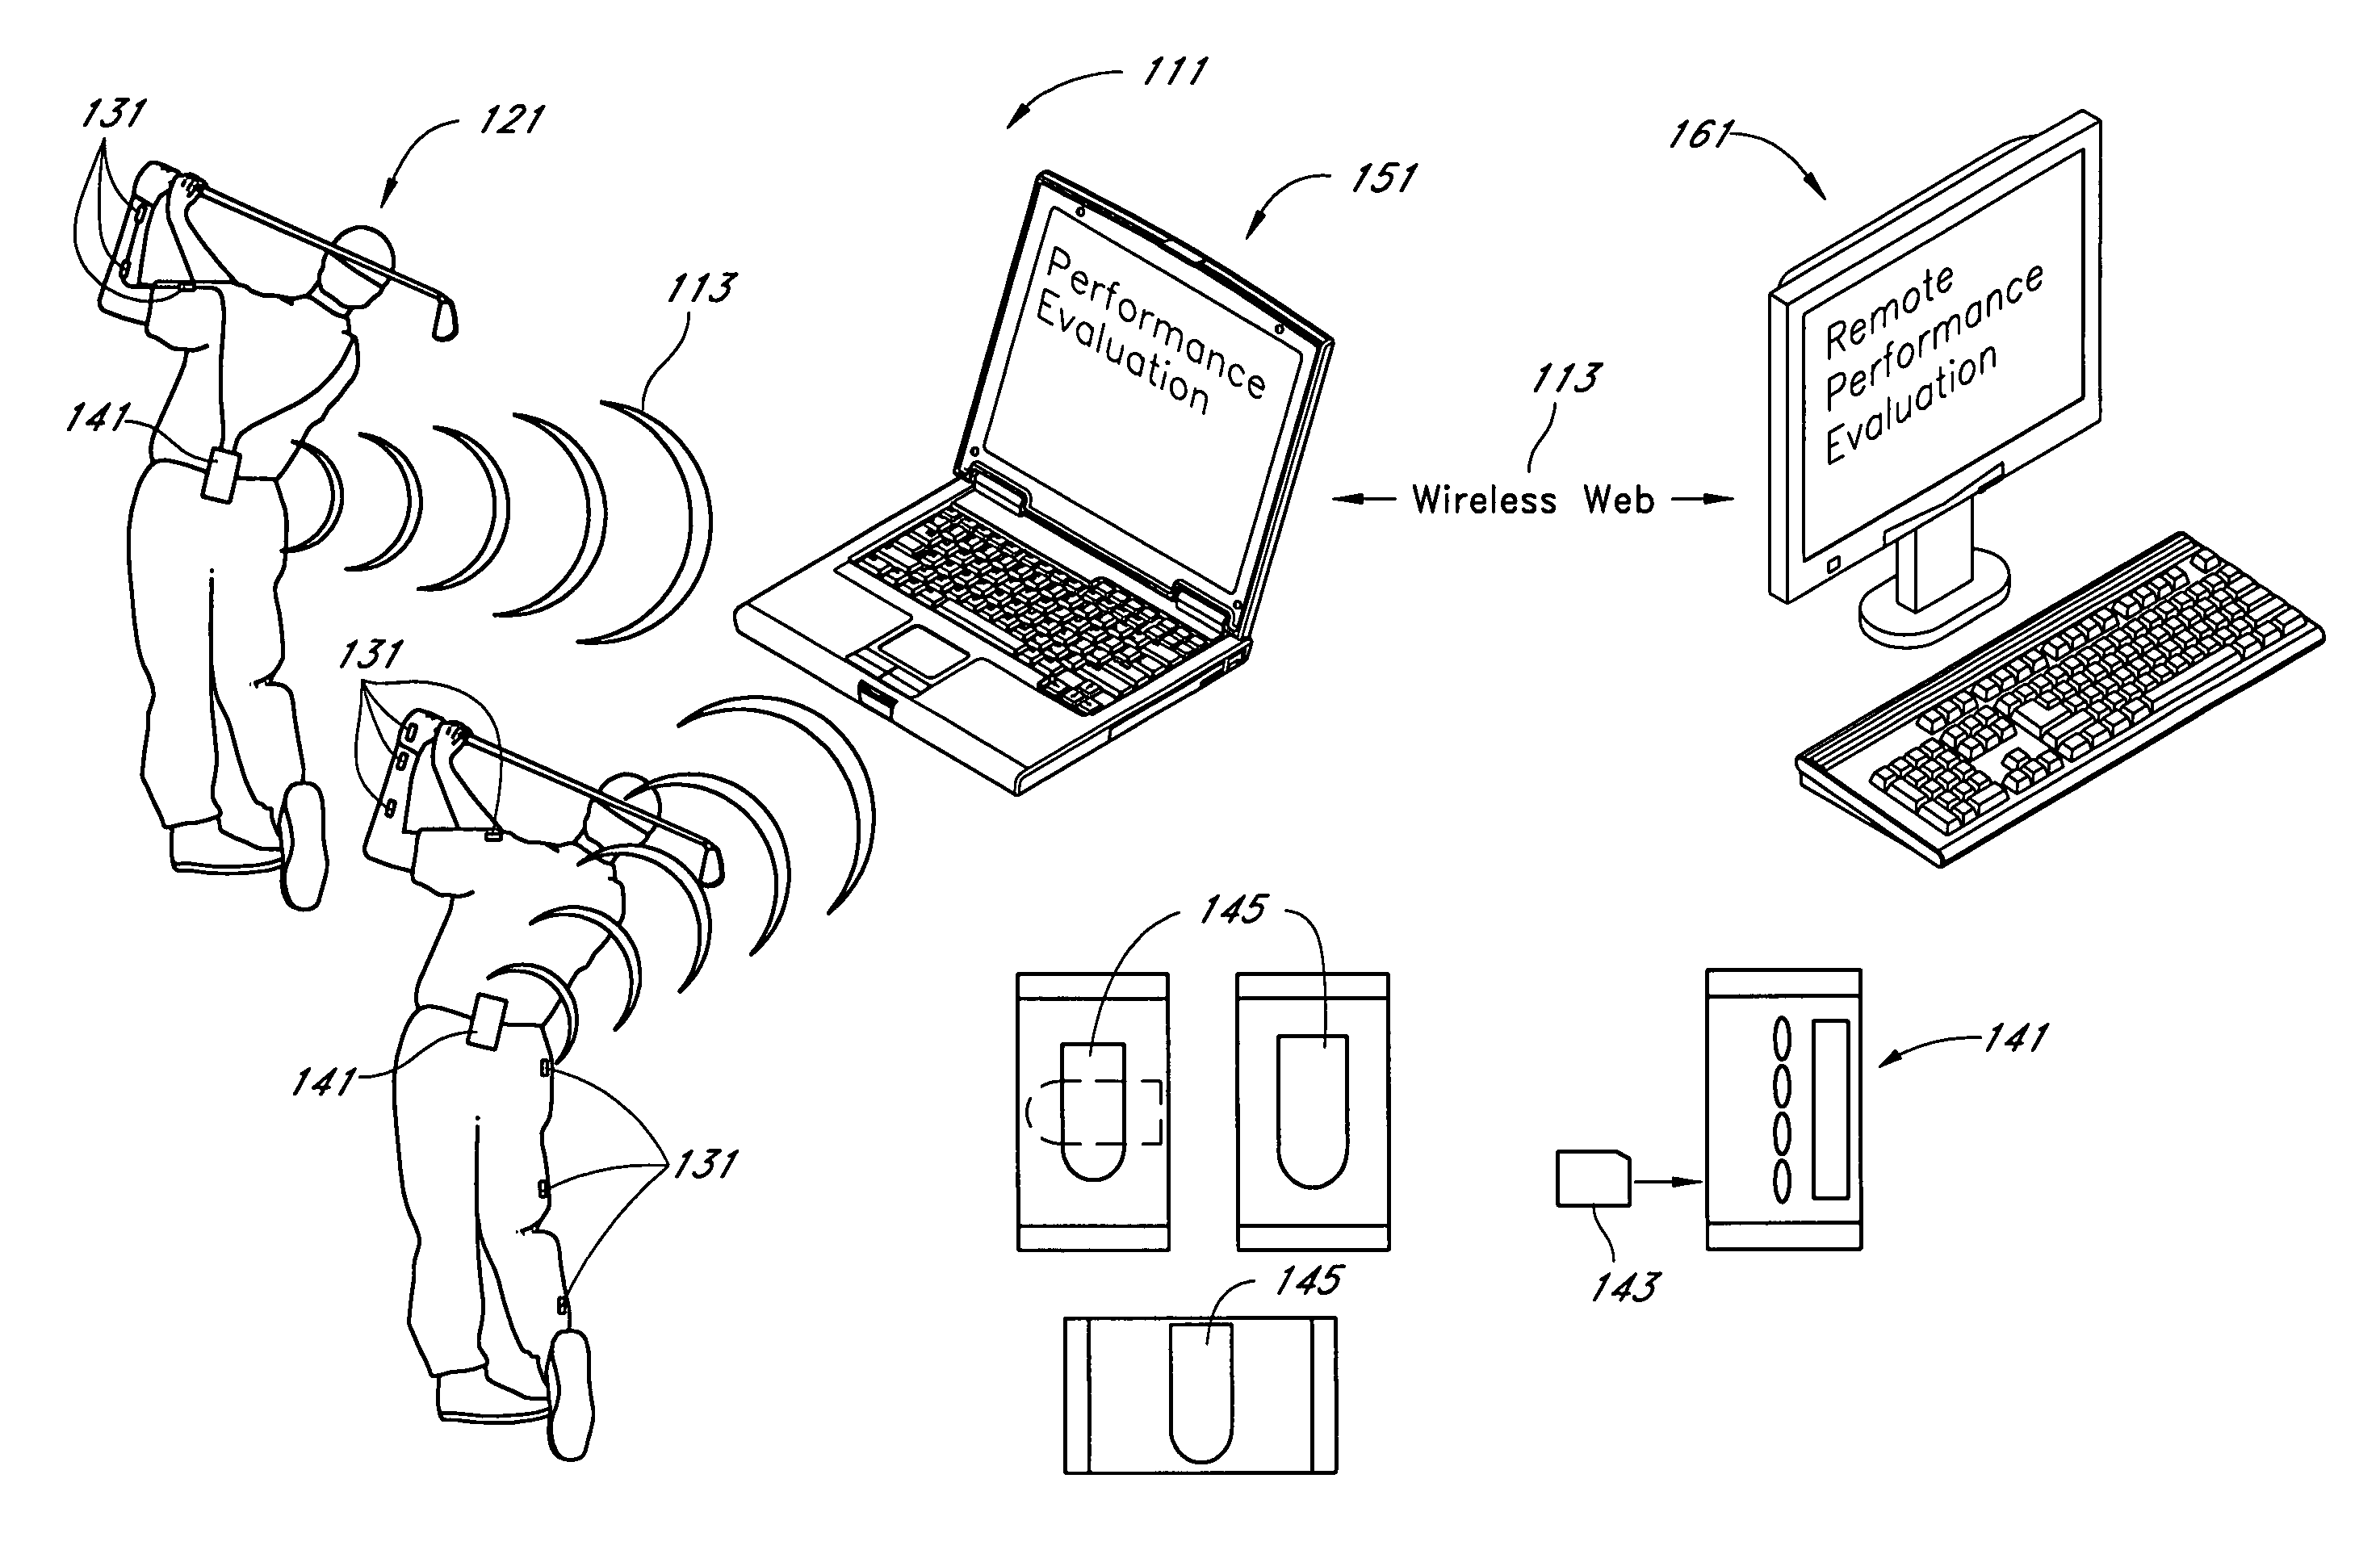 Apparatus, systems, and methods for gathering and processing biometric and biomechanical data